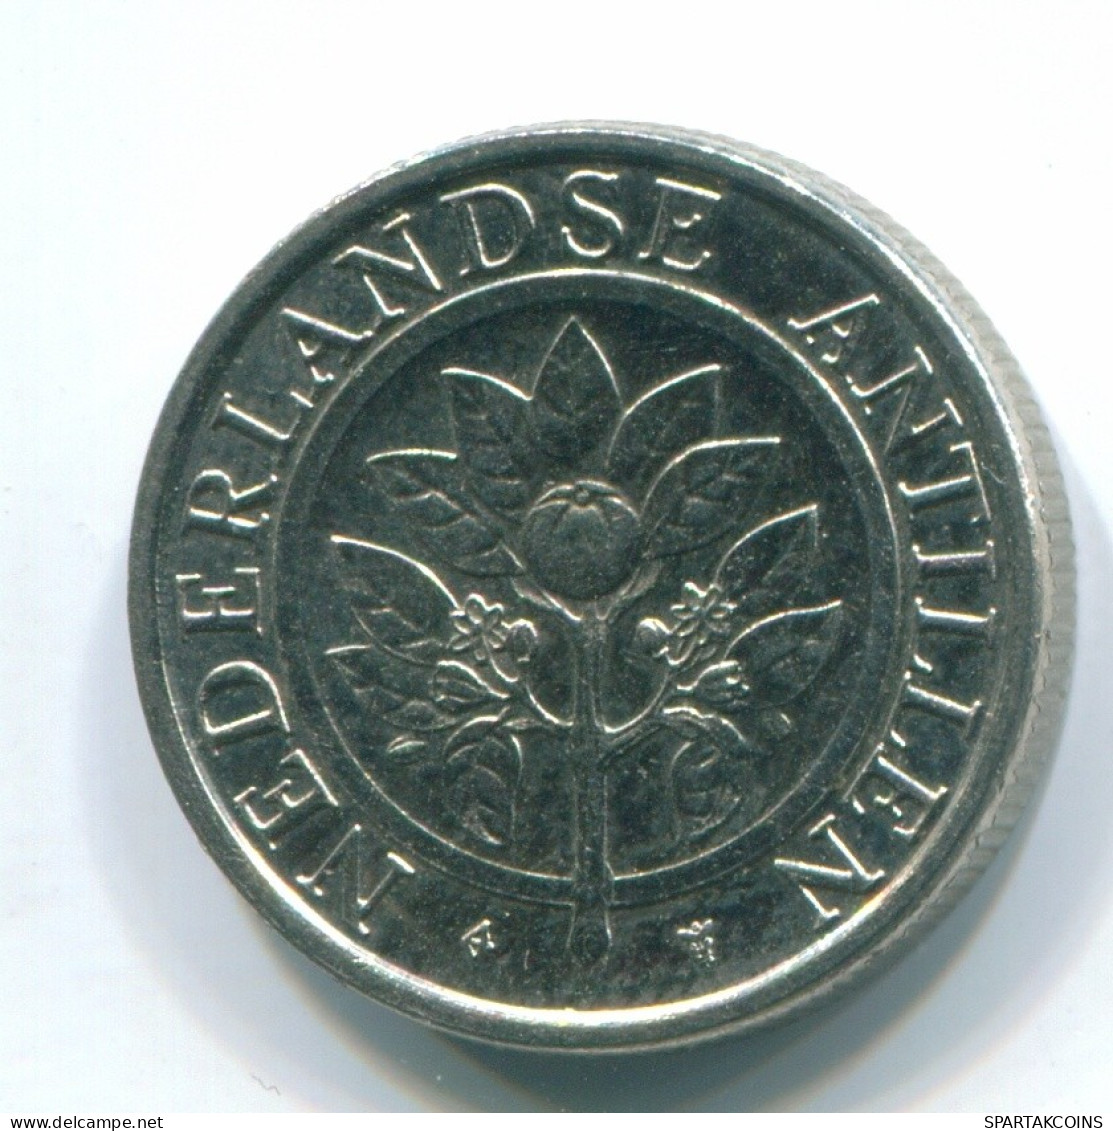 10 CENTS 1989 NETHERLANDS ANTILLES Nickel Colonial Coin #S11317.U.A - Antille Olandesi